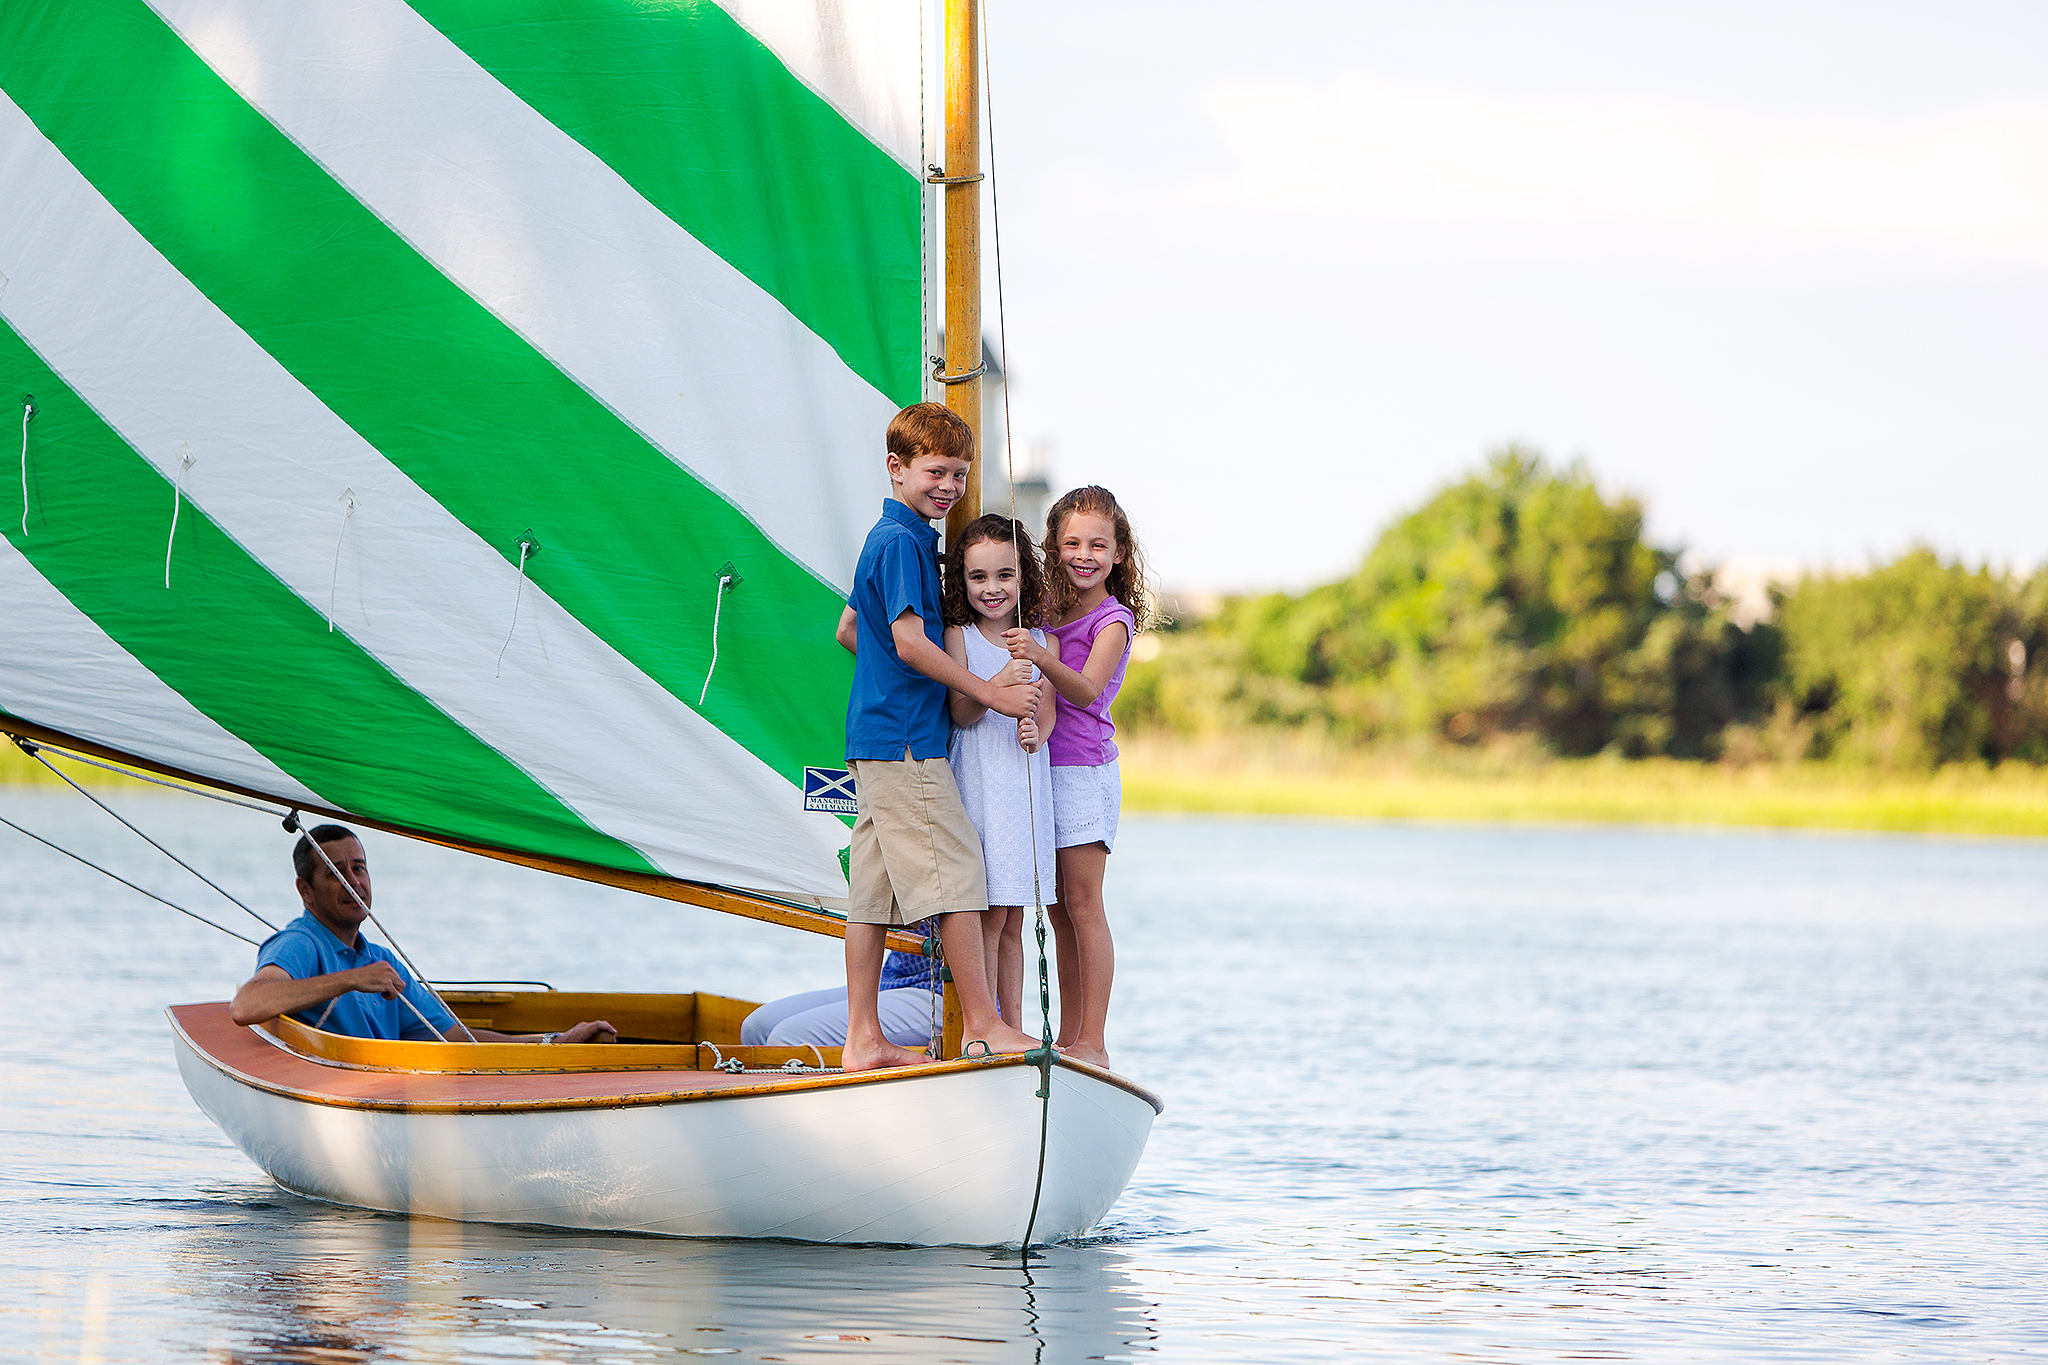 brother and sisters standing in front of sailboat while dad watches